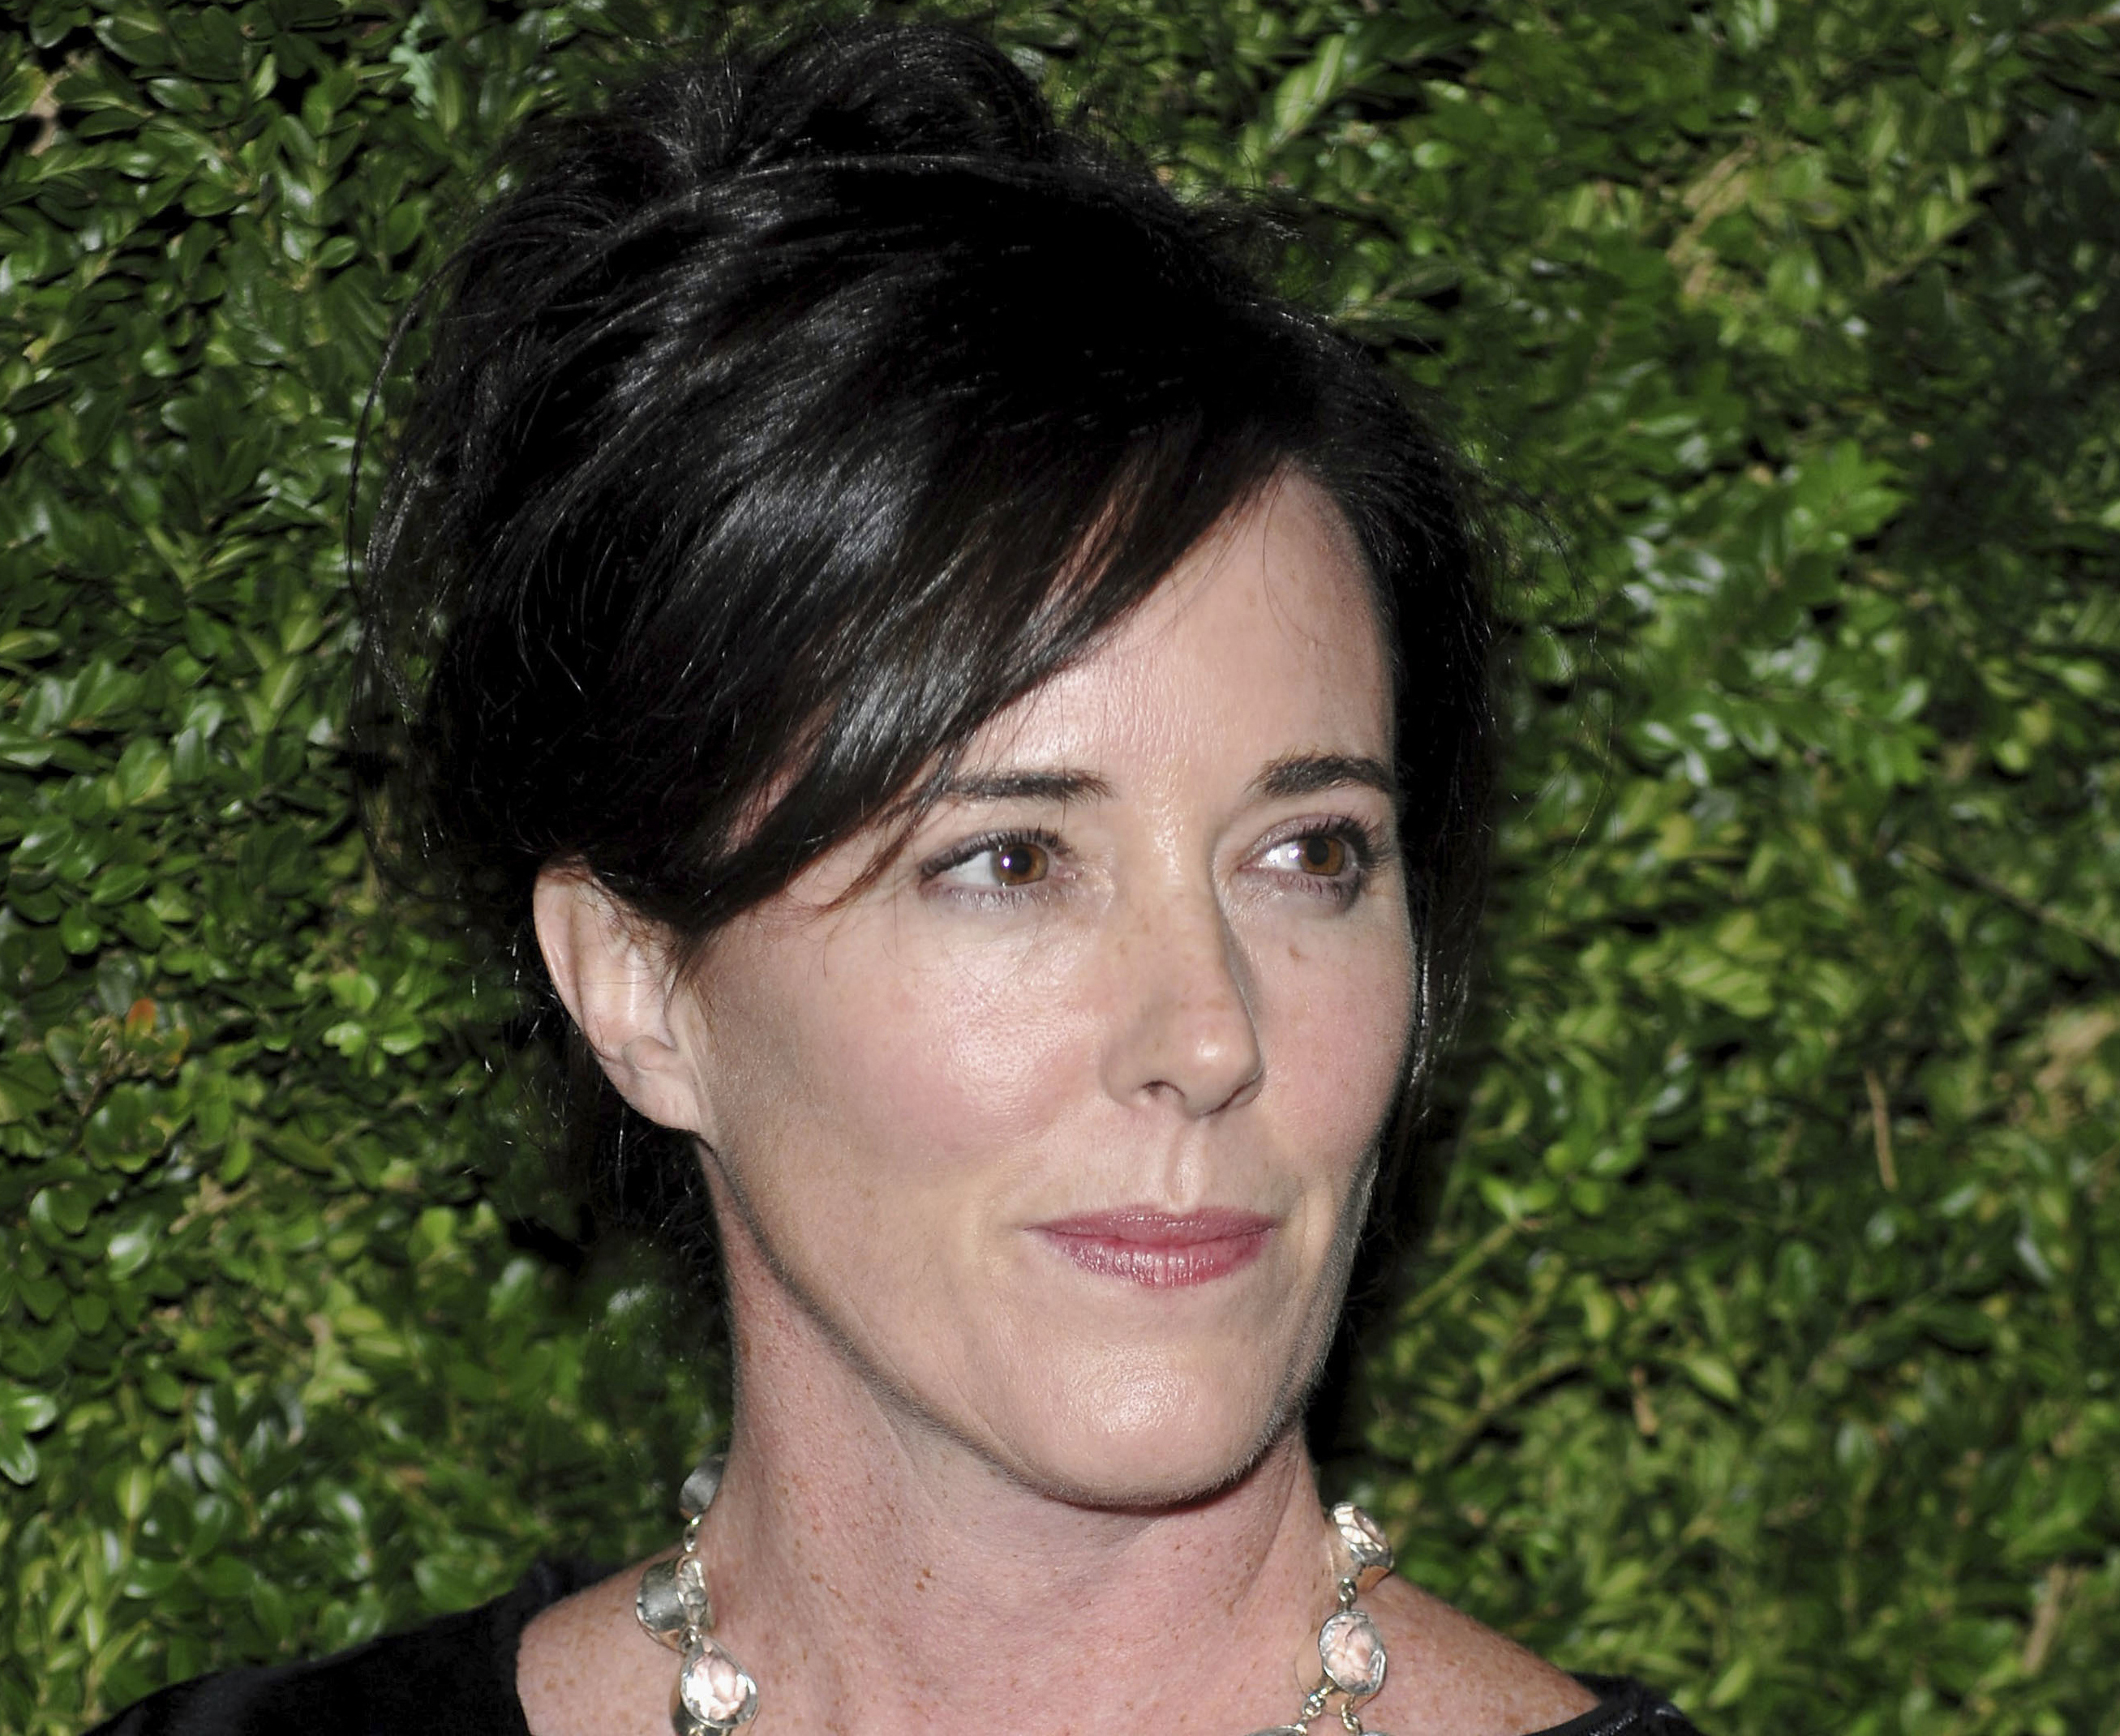 Ulta Beauty apologizes for 'a very insensitive choice of words' in email  about Kate Spade 